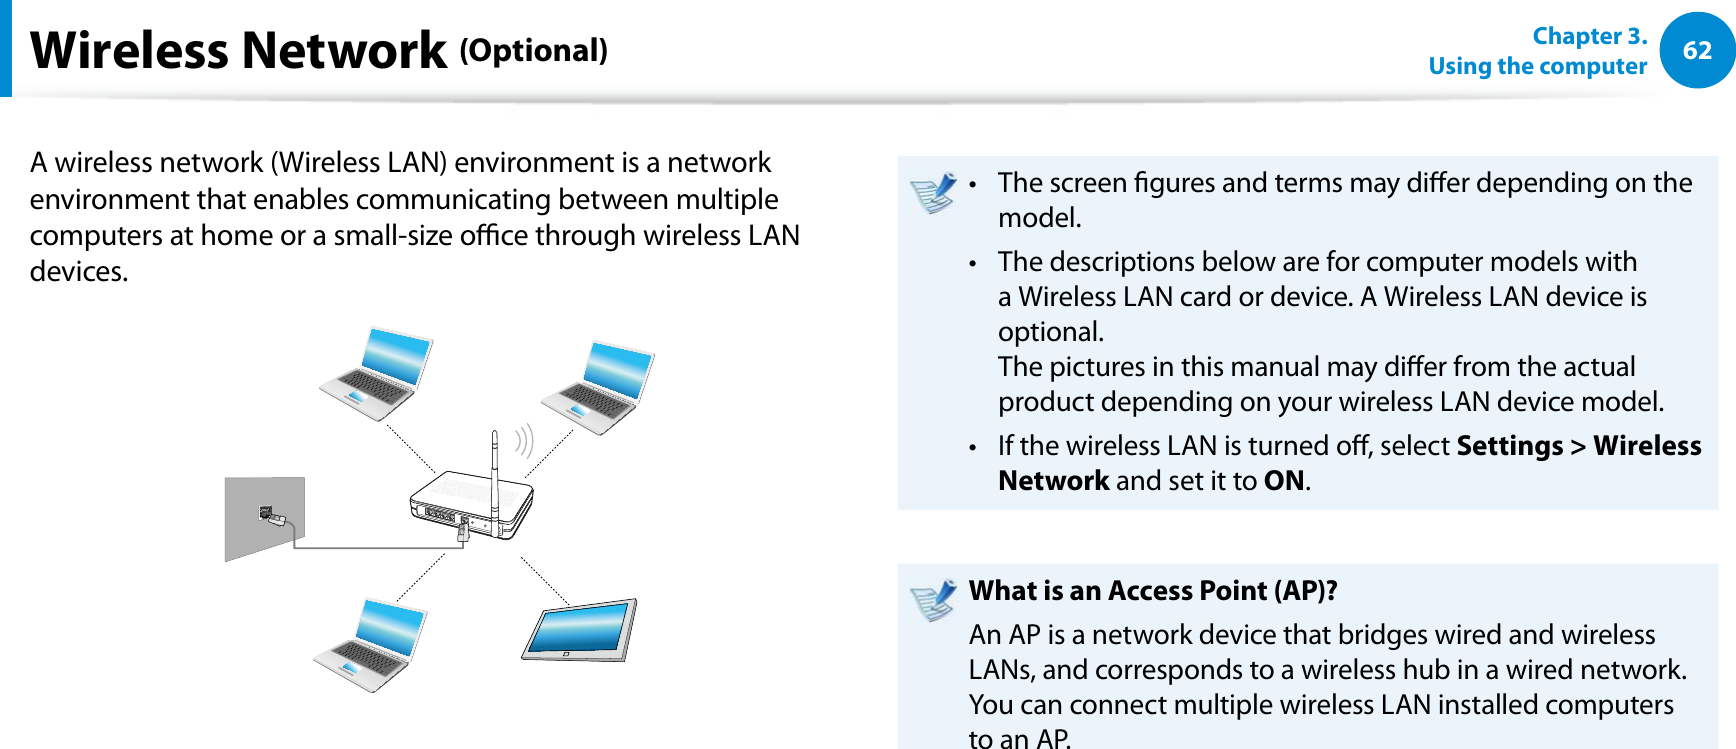 62Chapter 3.  Using the computerA wireless network (Wireless LAN) environment is a network environment that enables communicating between multiple computers at home or a small-size oce through wireless LAN devices.The screen gures and terms may dier depending on the t model.The descriptions below are for computer models with t a Wireless LAN card or device. A Wireless LAN device is optional. The pictures in this manual may dier from the actual product depending on your wireless LAN device model.If the wireless LAN is turned o, select t Settings &gt; Wireless Network and set it to ON.What is an Access Point (AP)?An AP is a network device that bridges wired and wireless LANs, and corresponds to a wireless hub in a wired network. You can connect multiple wireless LAN installed computers to an AP.Wireless Network (Optional)